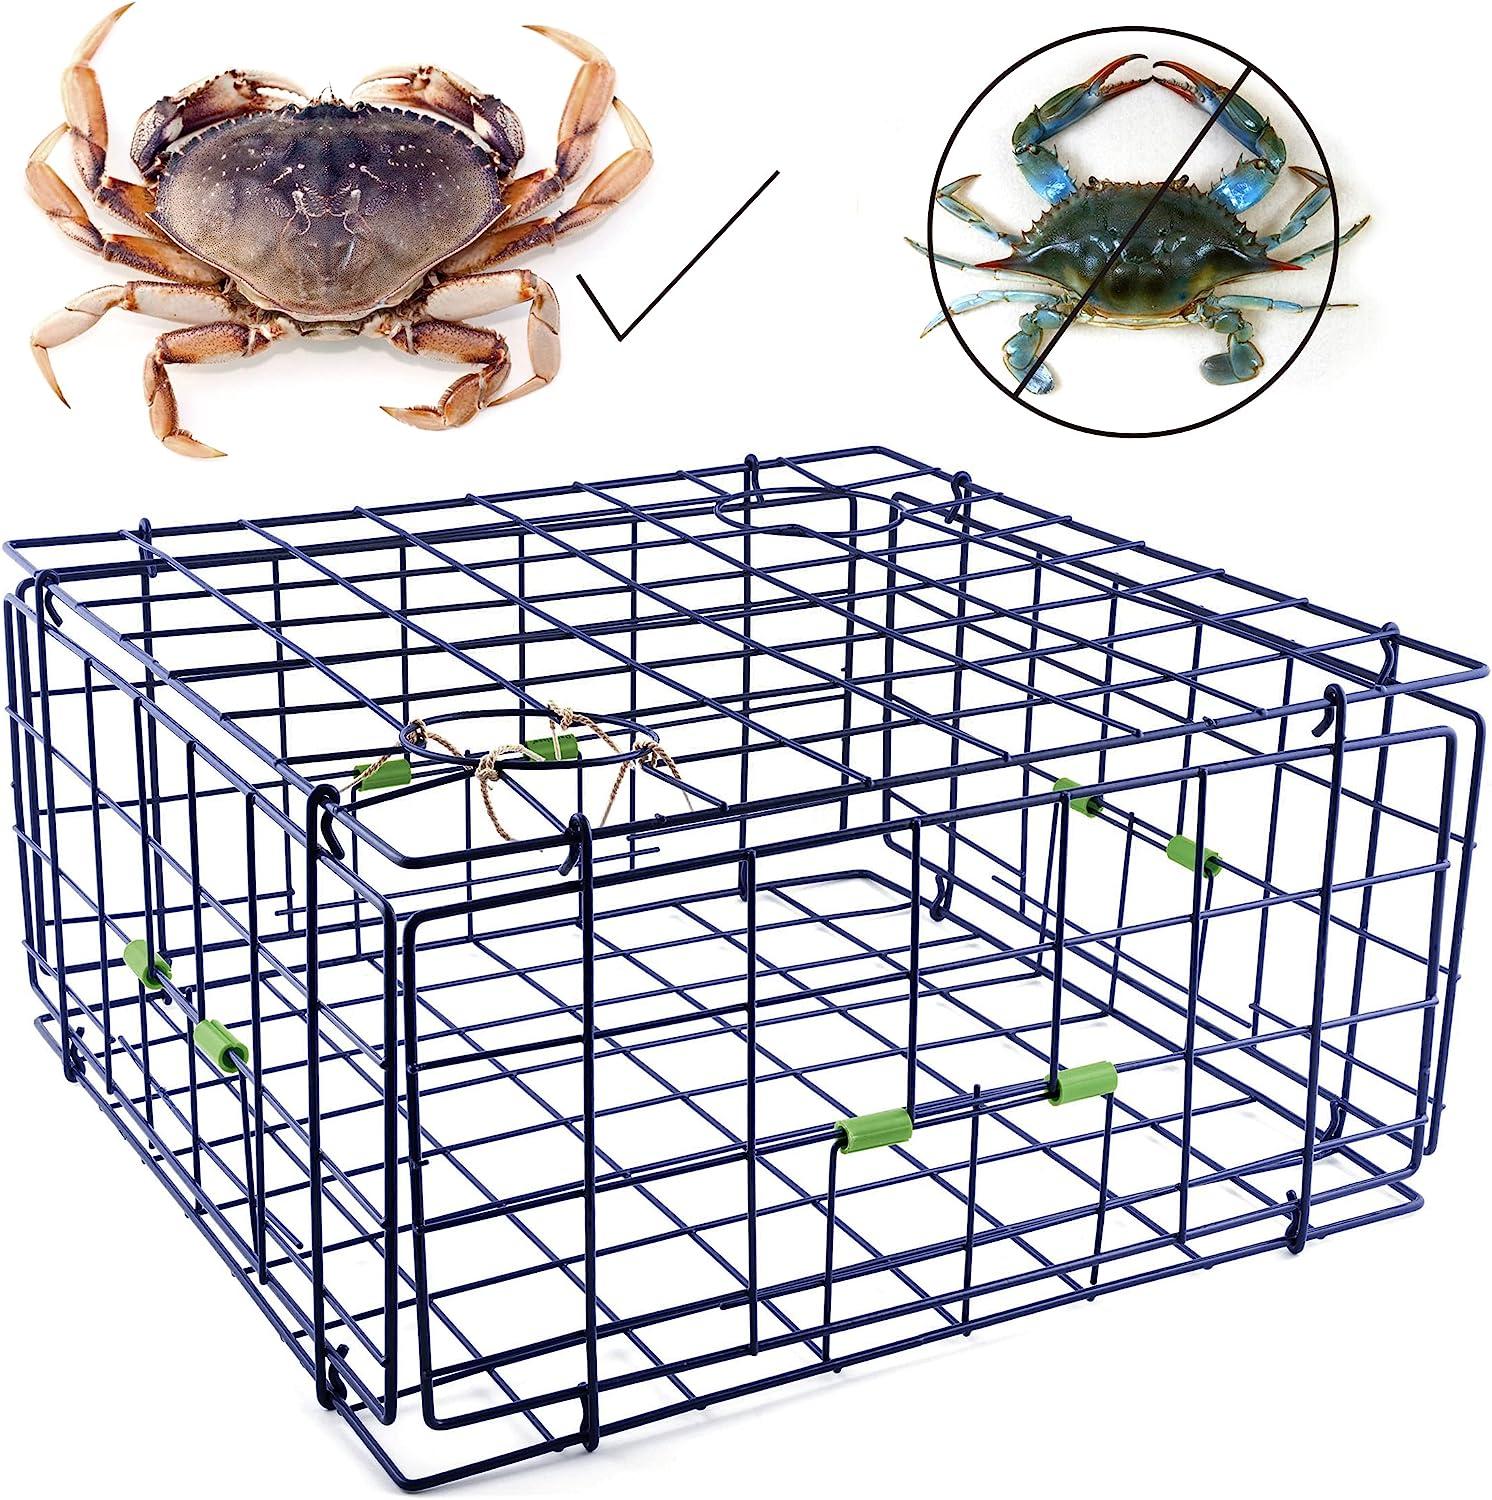 Buy Premium collapsible blue crab trap For Fishing 